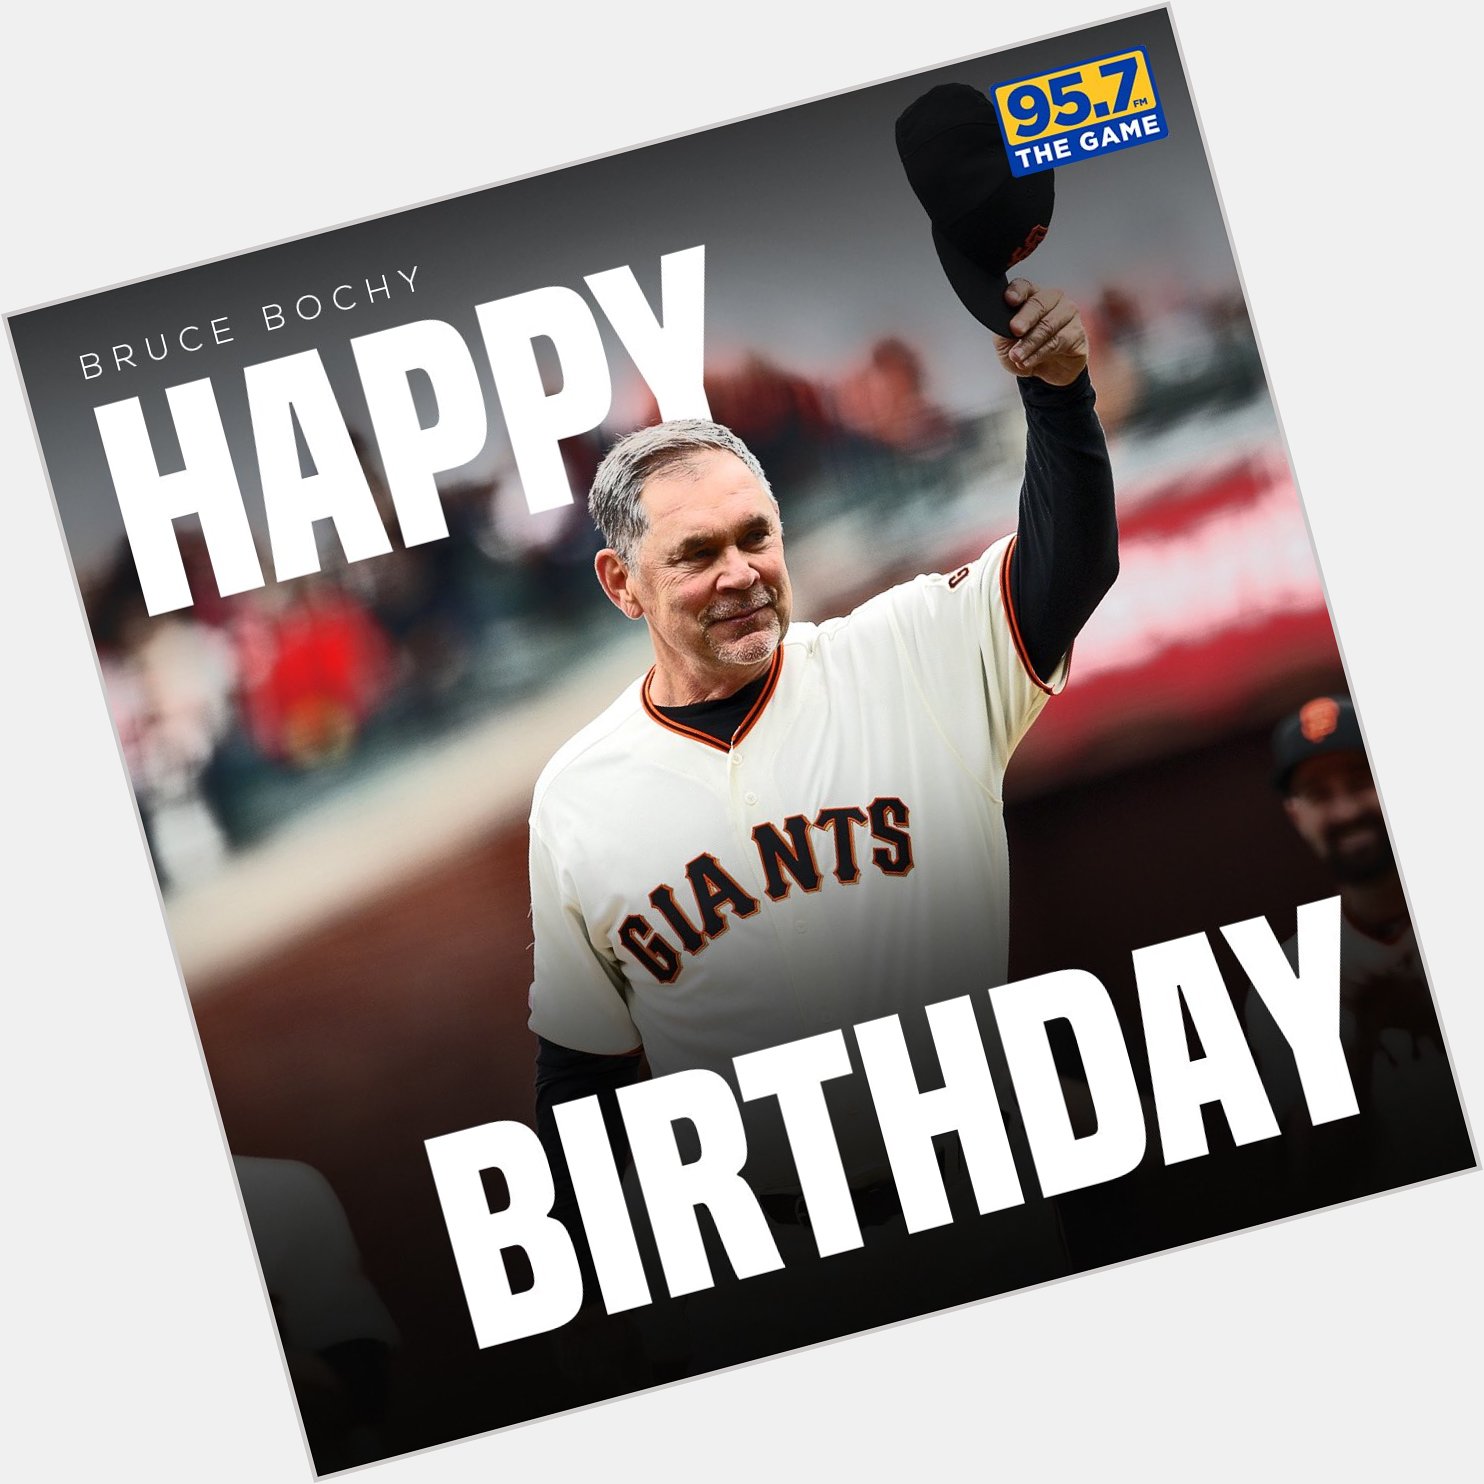 Happy Birthday to the one and only Bruce Bochy  